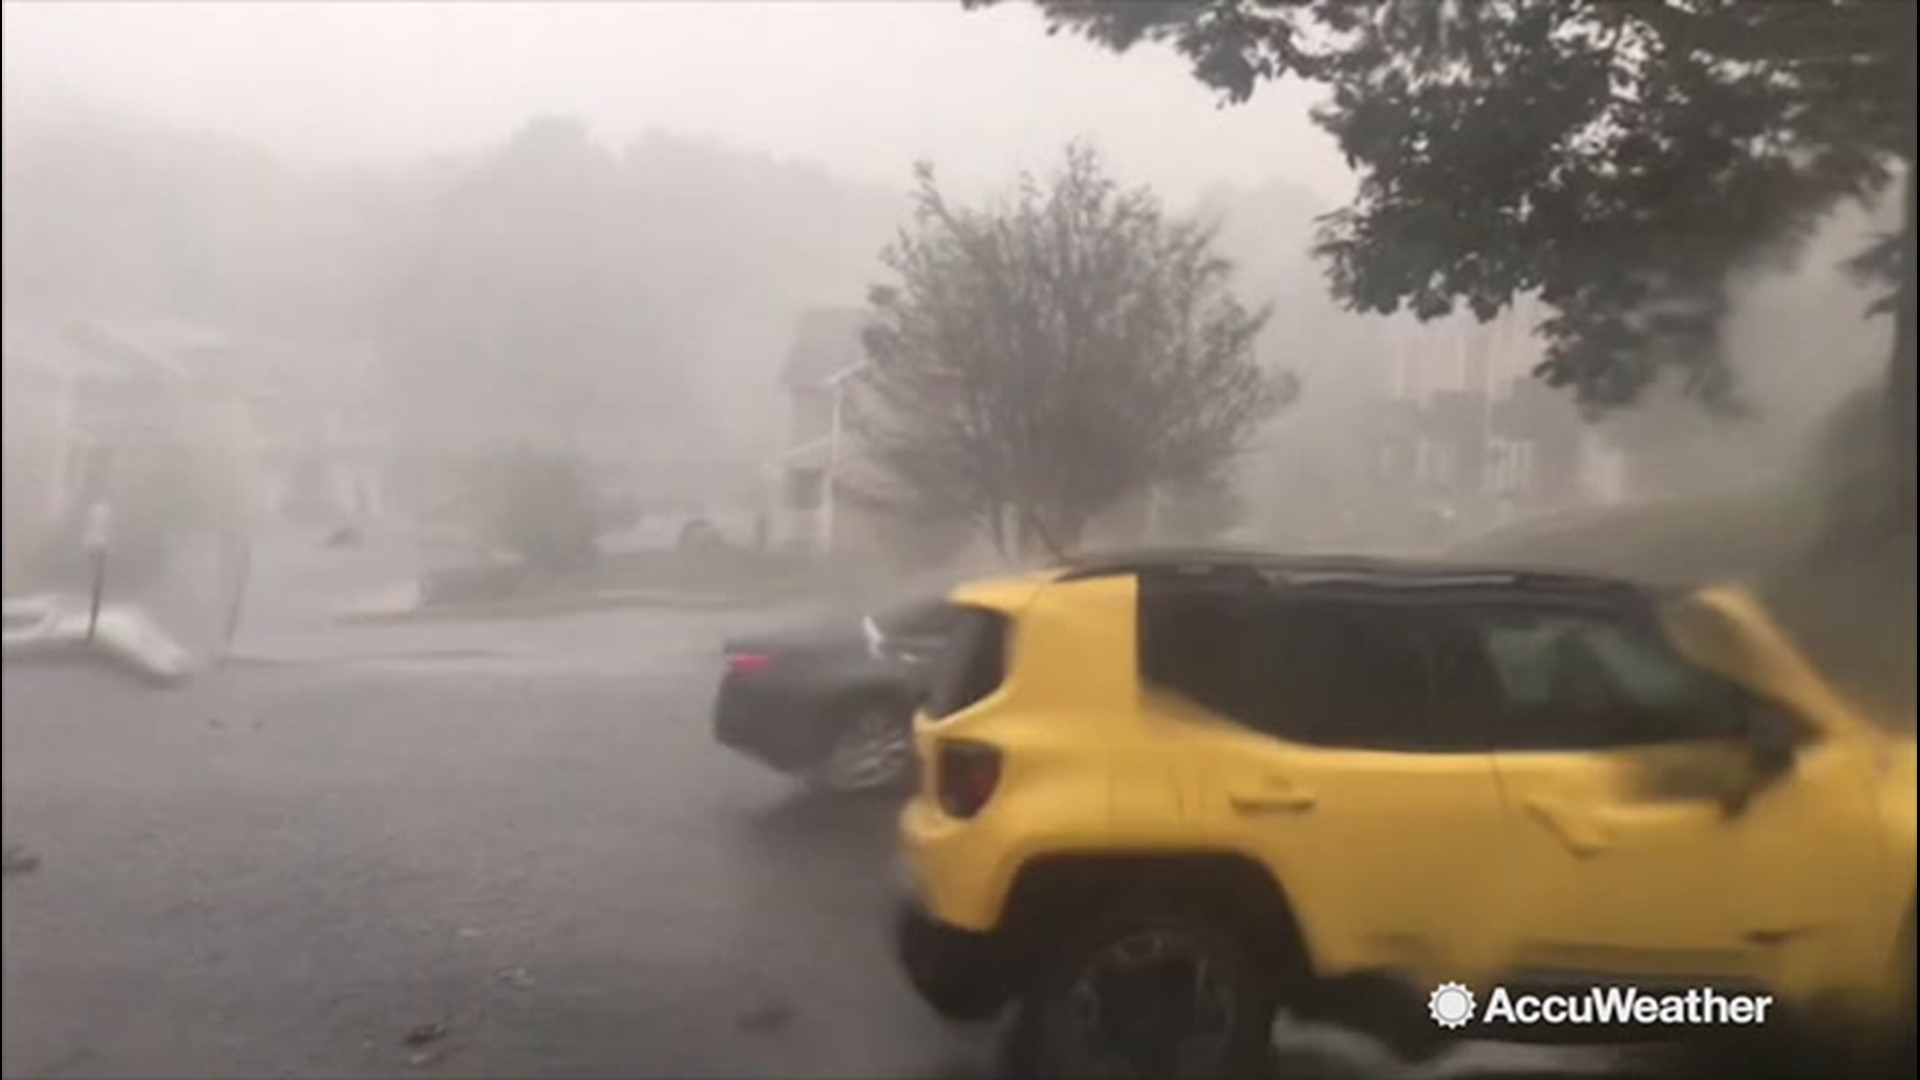 AccuWeather's Carolina Jones and Krissy Pydynowski have provided footage first of hail pelting a neighborhood, then the wind blowing around a light post at the State College Spikes field in State College, Pennsylvania, on Aug. 18.